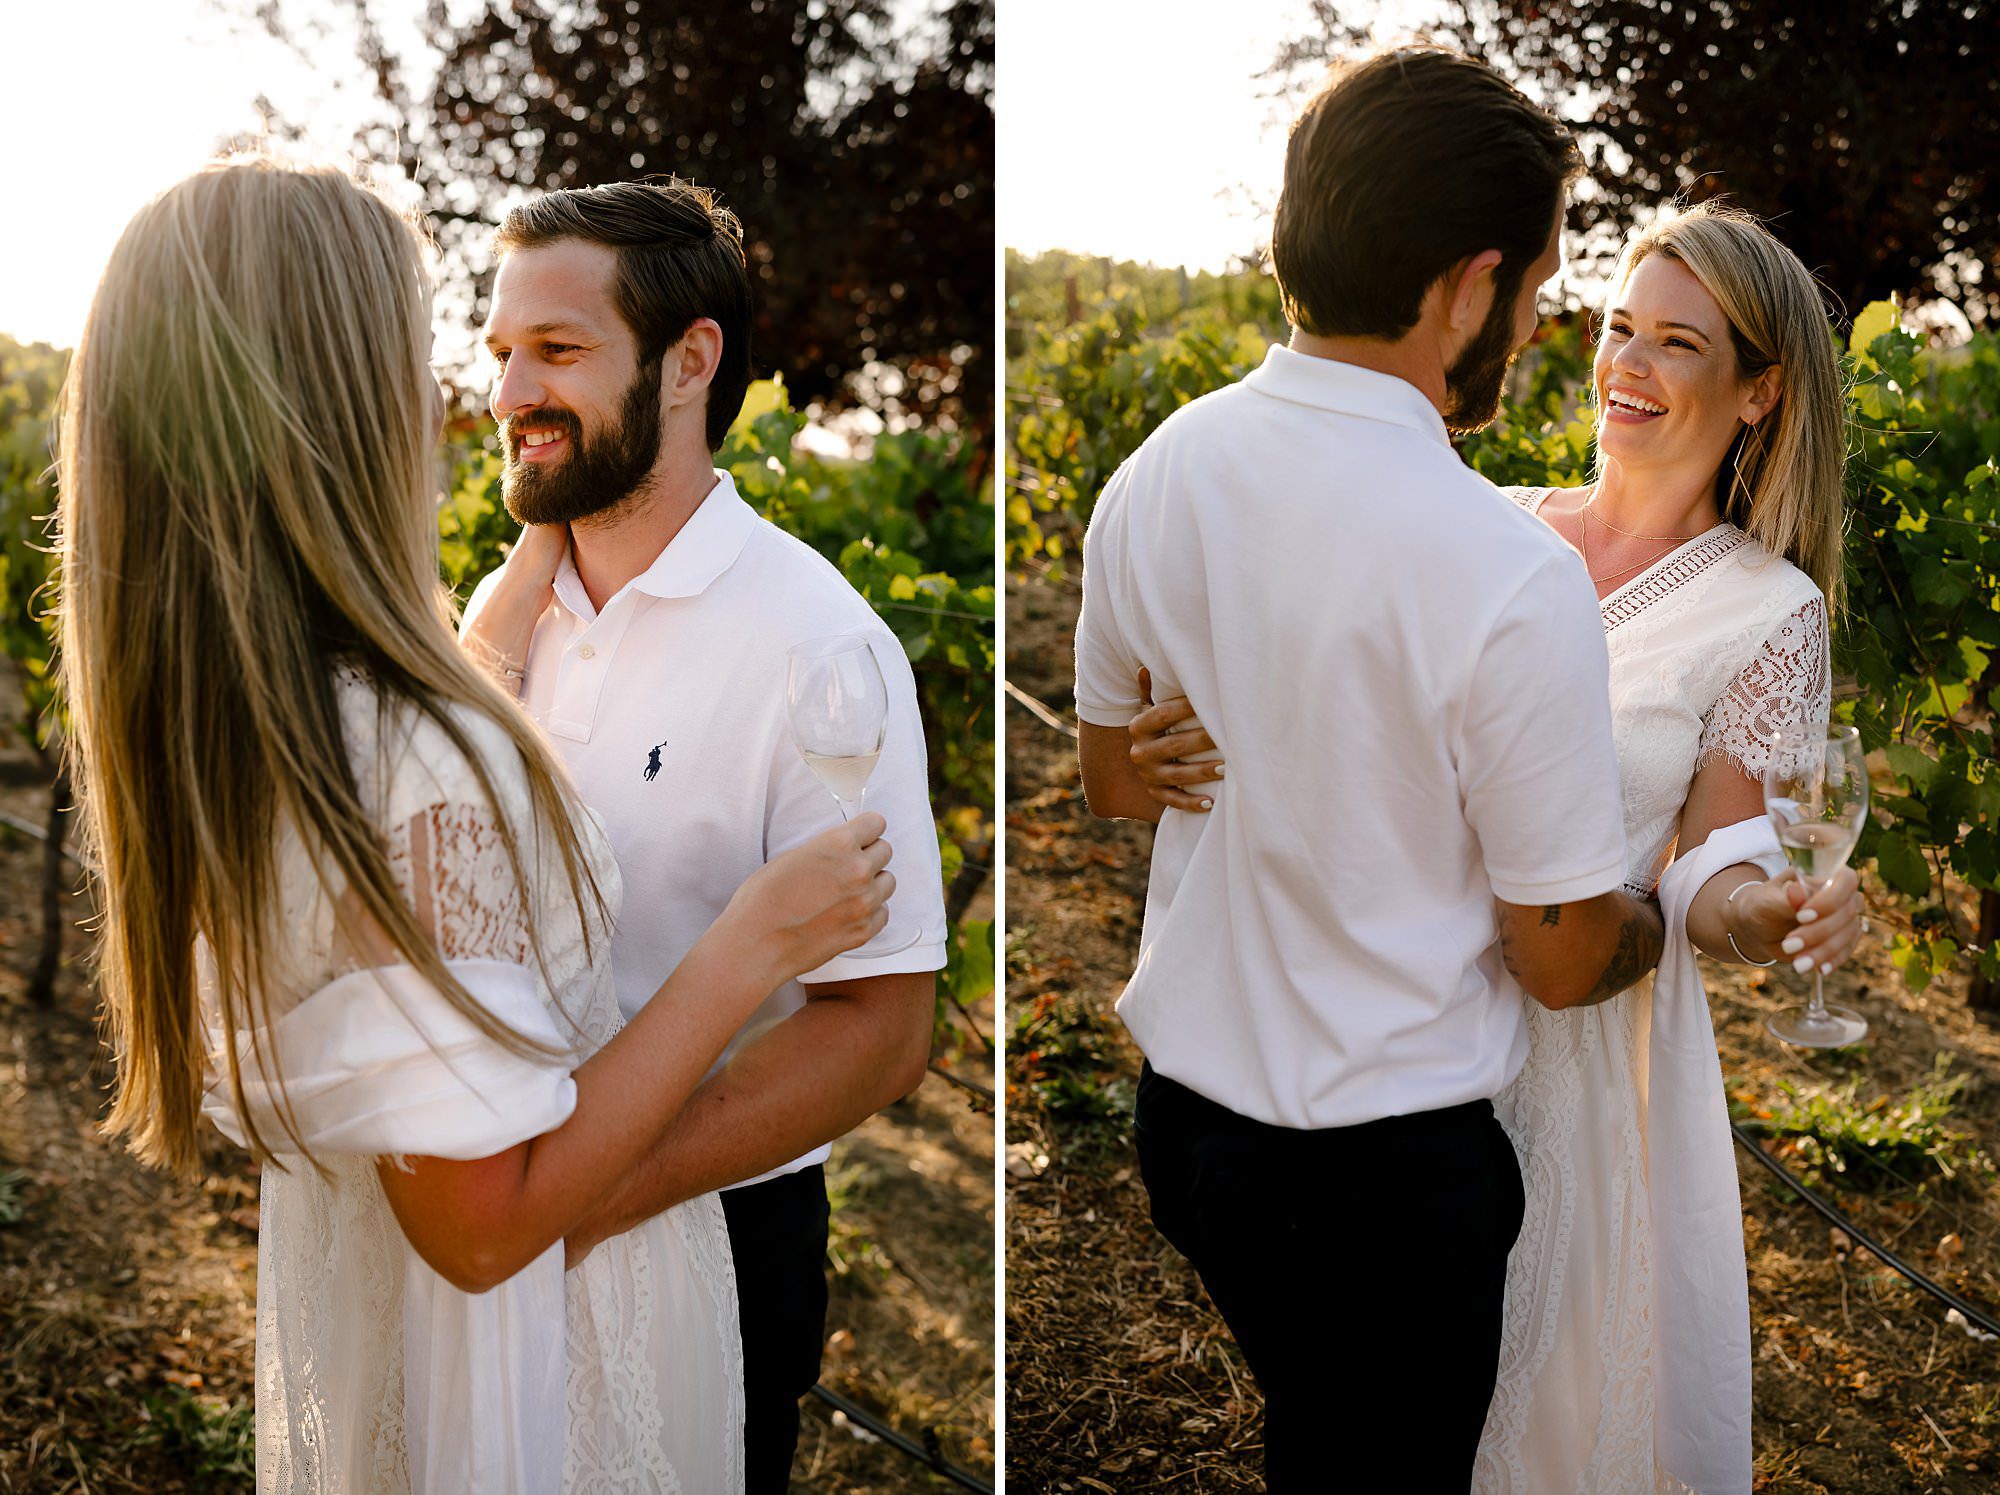 Side by side of Cameron and Melissa embracing in the vineyard at Domaine Carneros.